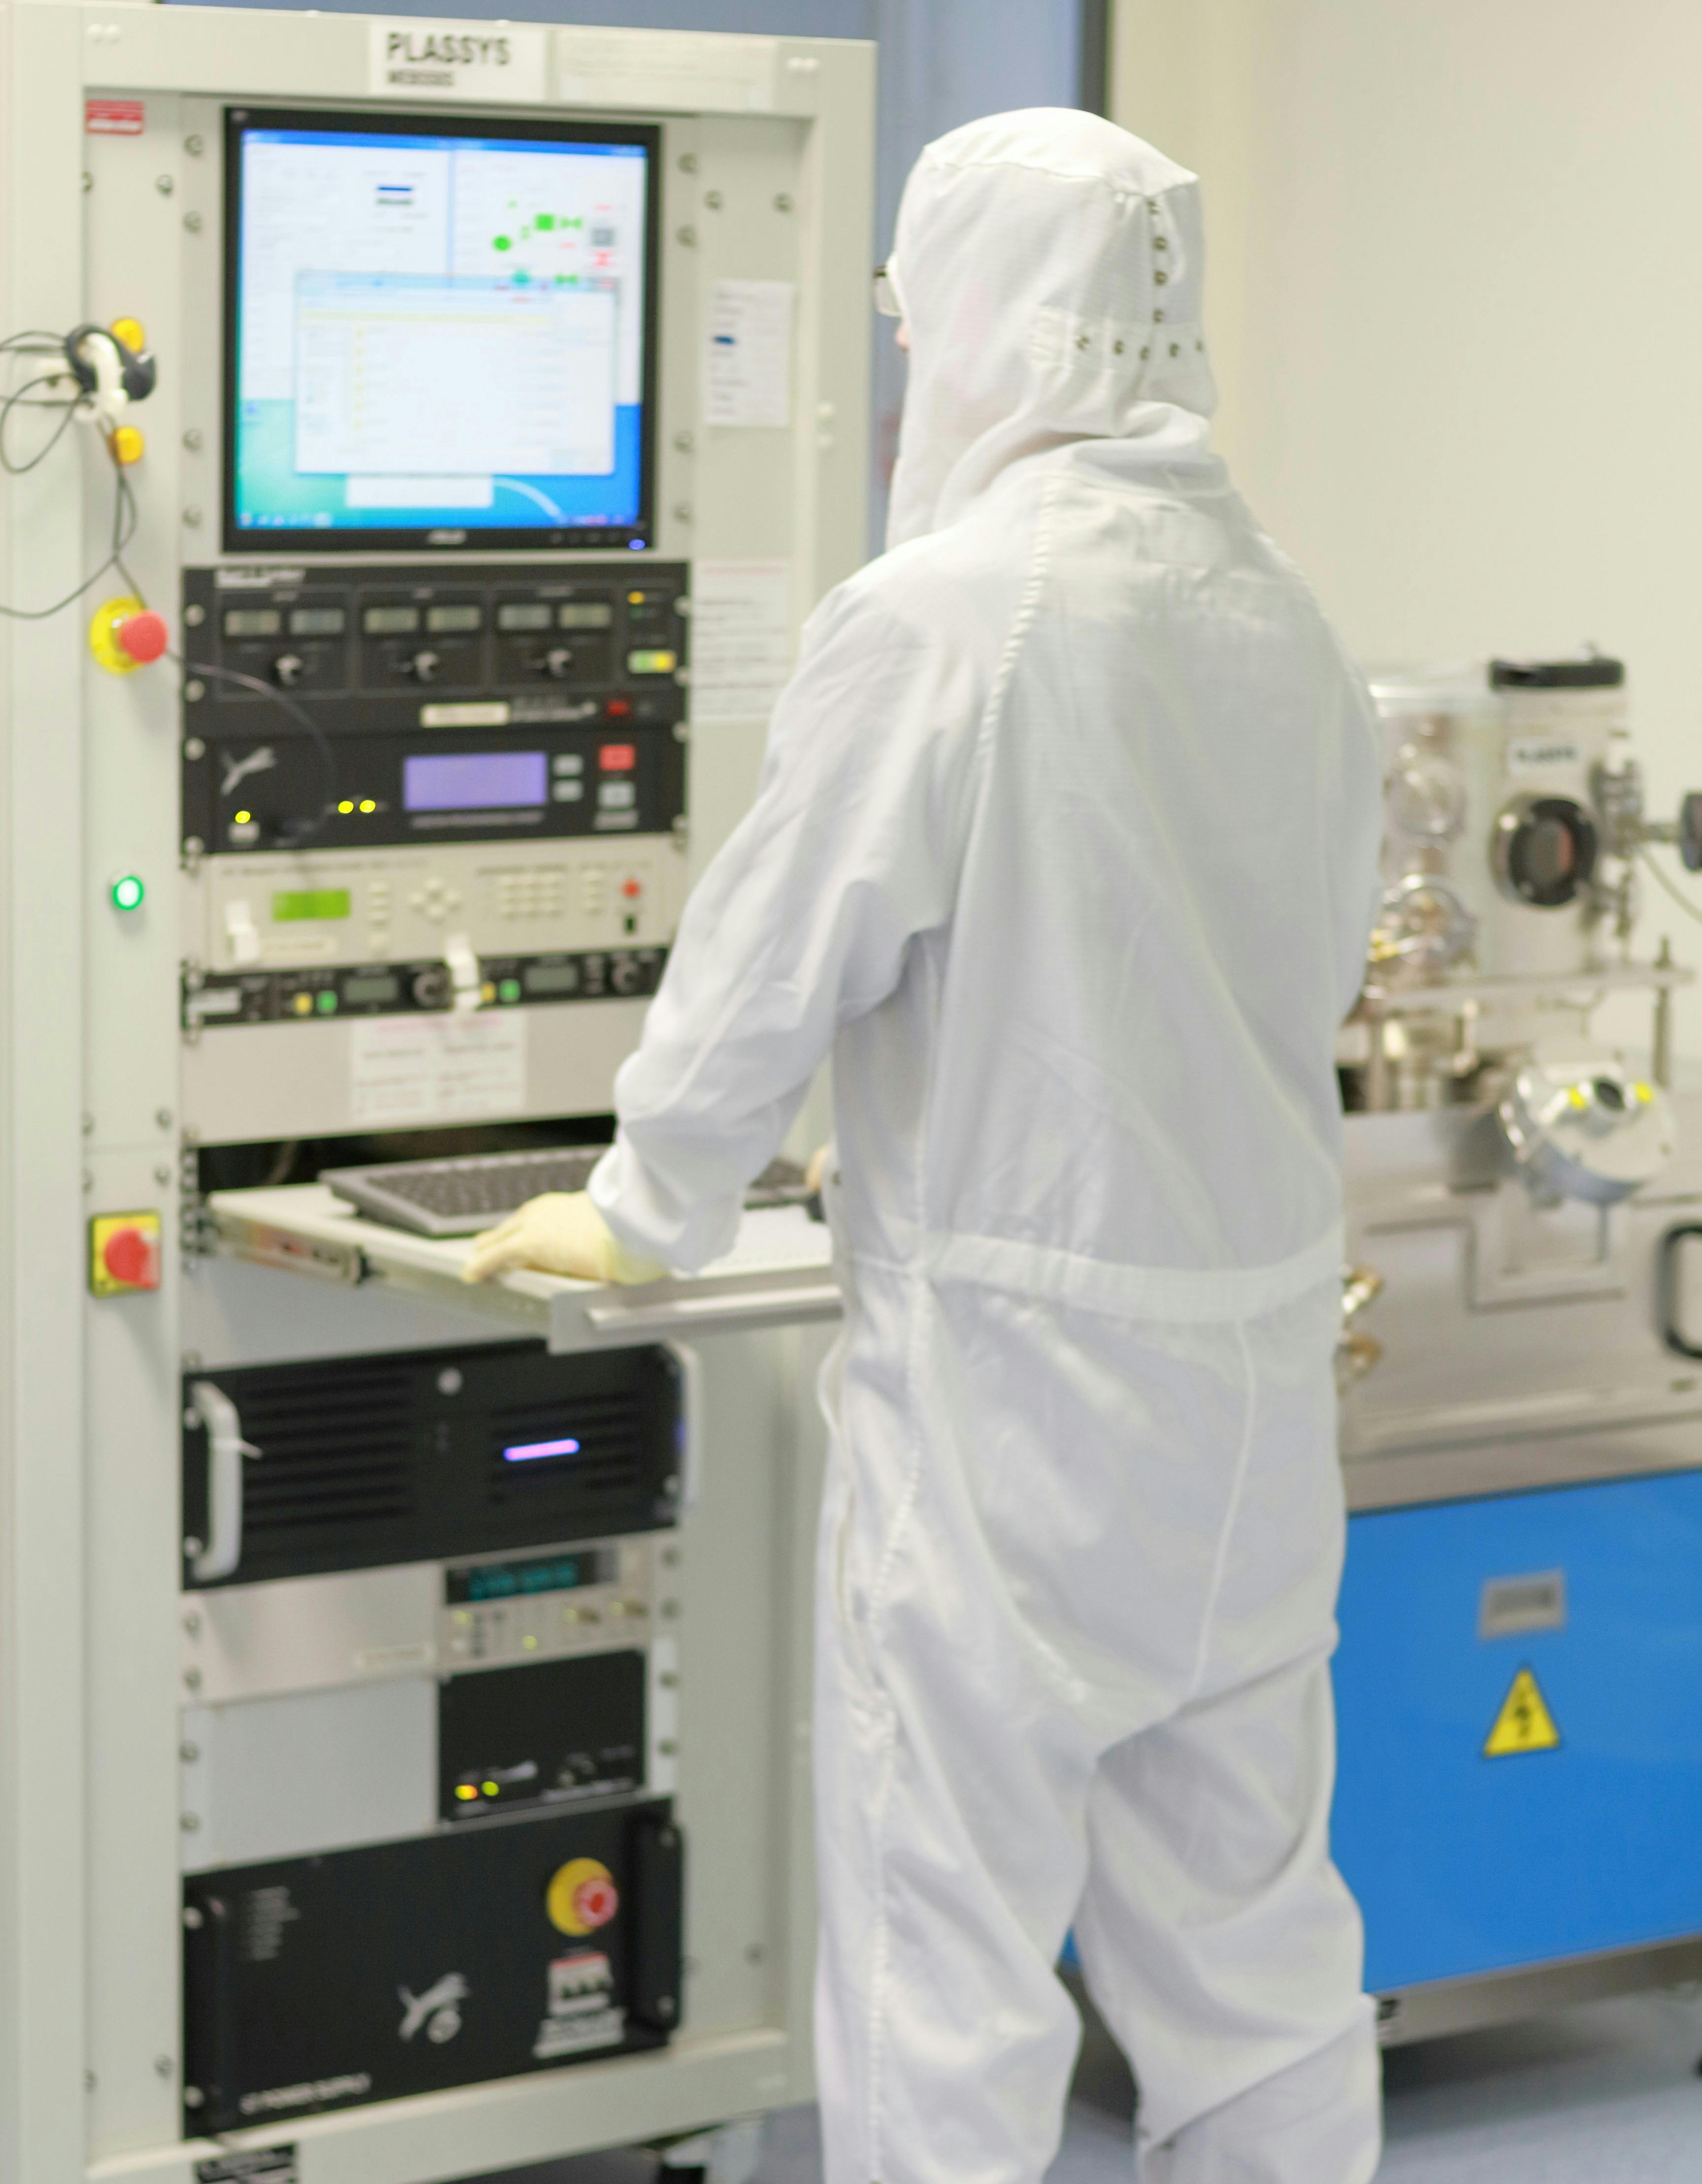 A cleanroom worker